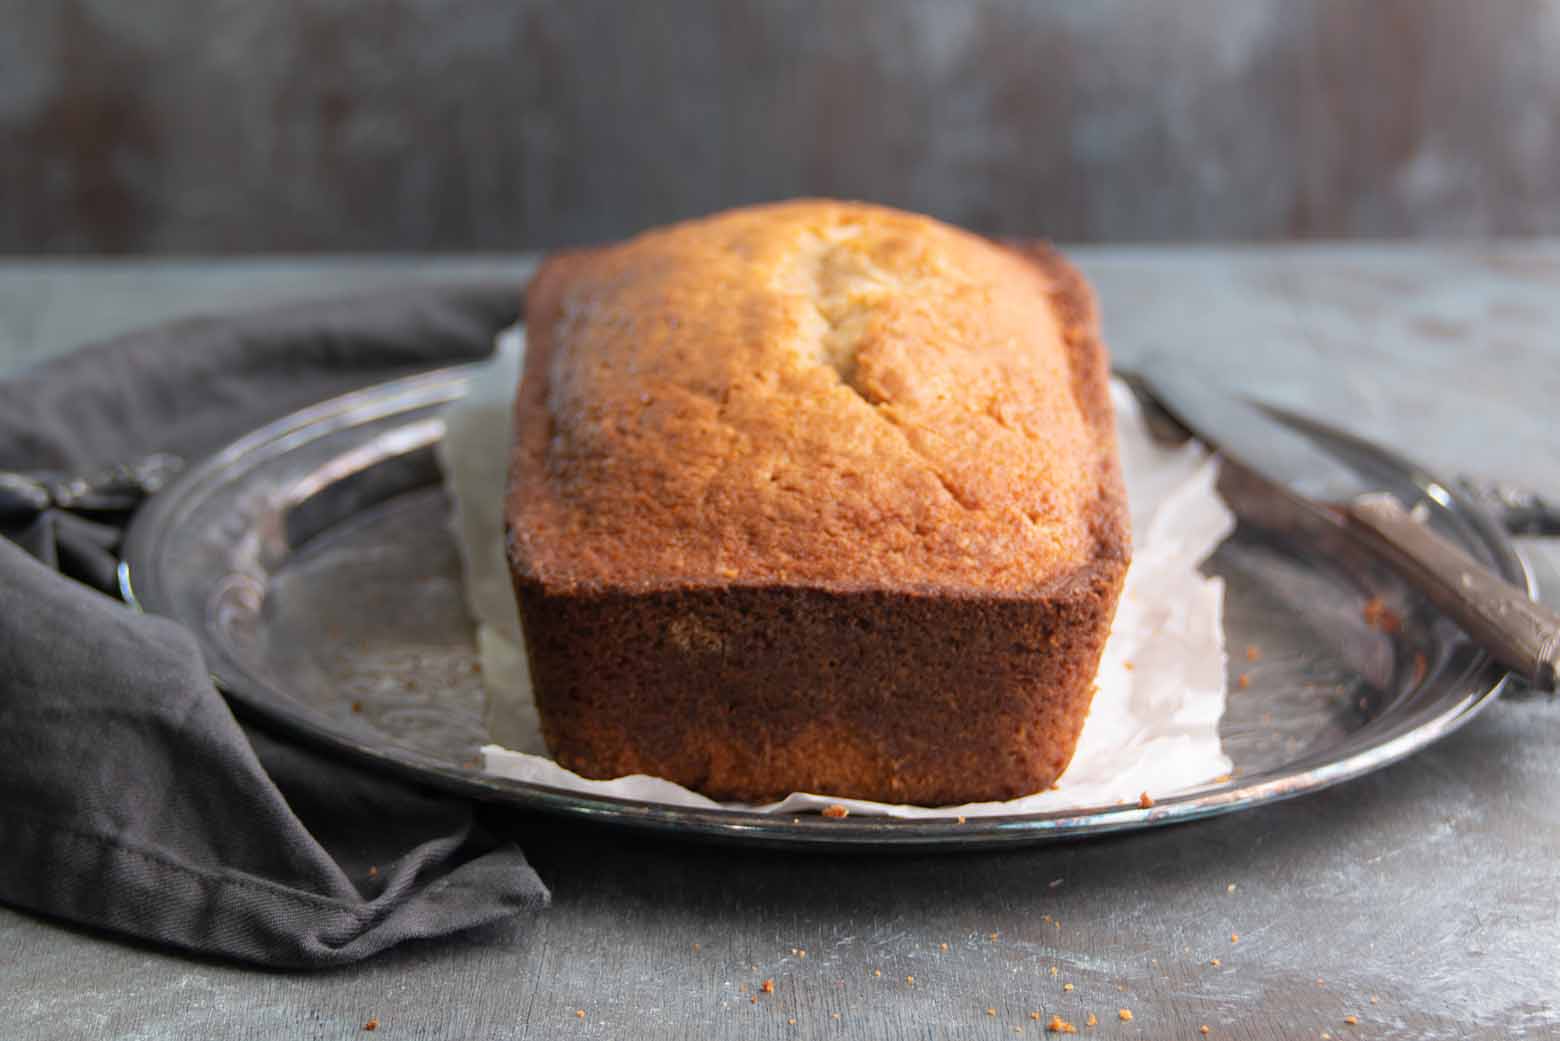 A spice loaf cake fresh out of the oven before frosting or decorating